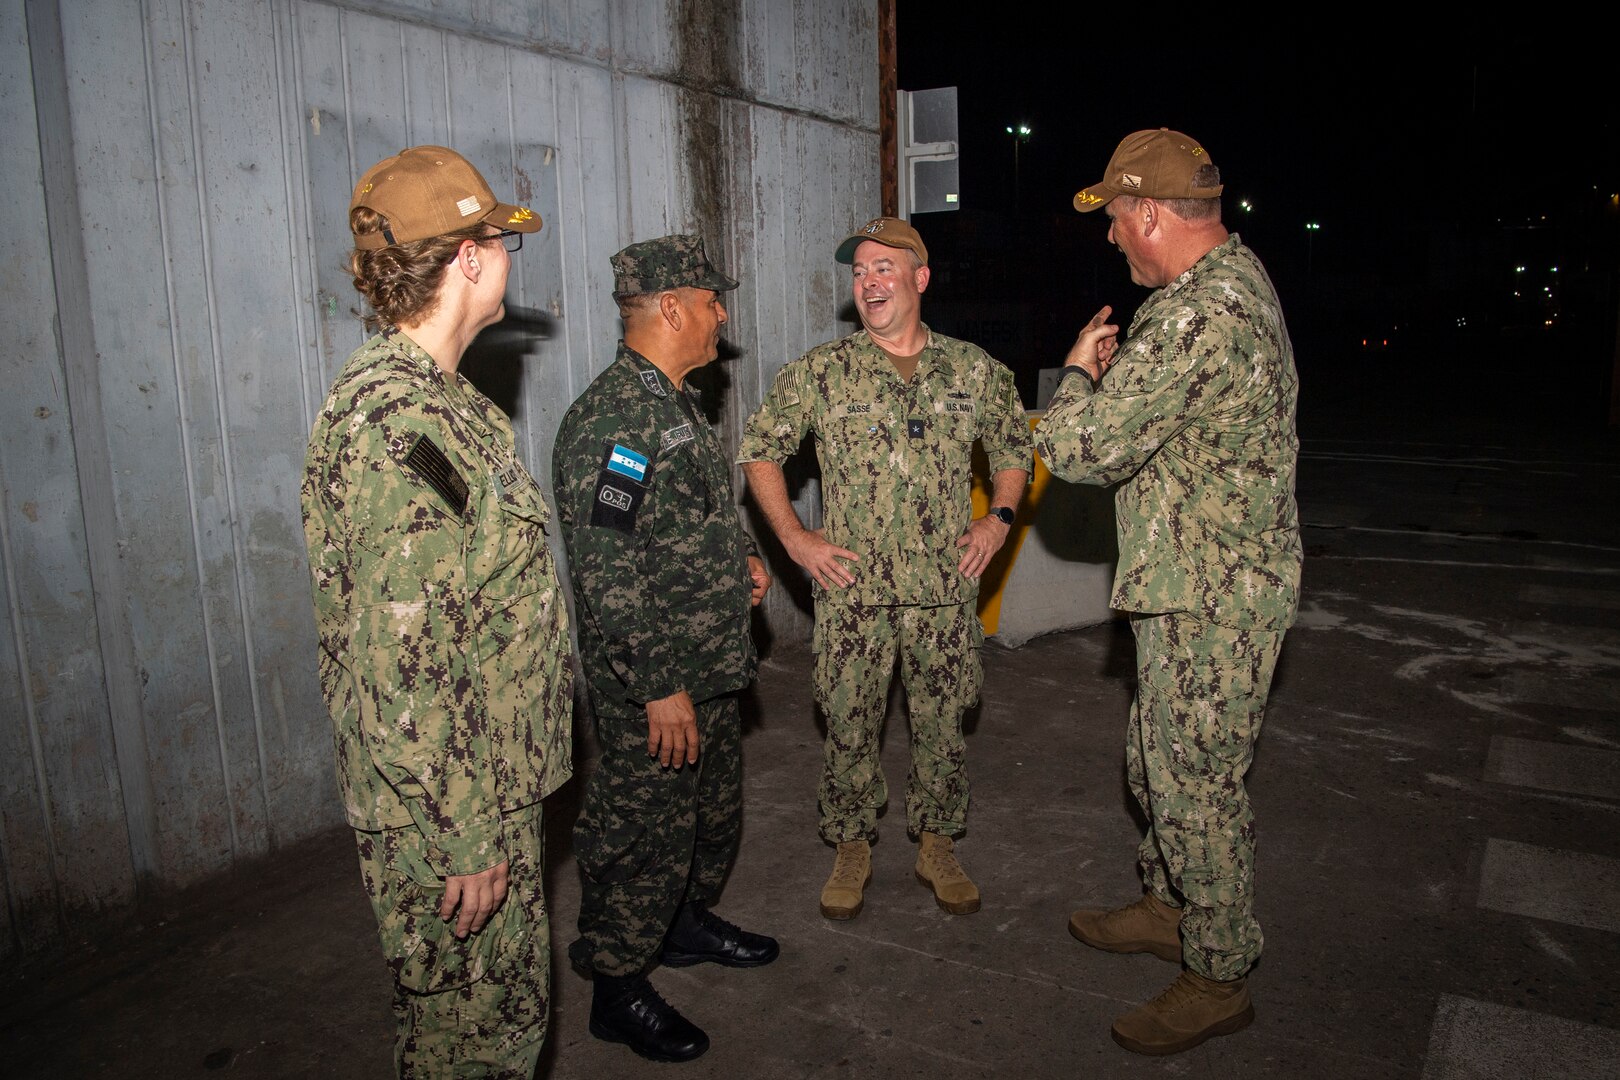 Capt. Kathryn S. Elliott, from left, commanding officer of the Medical Treatment Facility aboard the hospital ship USNS Comfort (T-AH 20), Honduran navy Capt. Juan De Jesus, deputy commodore for Amphibious Squadron (PHIBRON) 4, Rear Adm. Douglas W. Sasse, III, Reserve Vice Commander, U.S. 4th Fleet, and Capt. Bryan Carmichael, commodore of PHIBRON 4, meet after the ship arrived for Continuing Promise 22 in Puerto Cortes, Honduras, Nov. 3, 2022. Comfort is deployed to U.S. 4th Fleet in support of CP22, a humanitarian assistance and goodwill mission conducting direct medical care, expeditionary veterinary care, and subject matter expert exchanges with five partner nations in the Caribbean, Central and South America